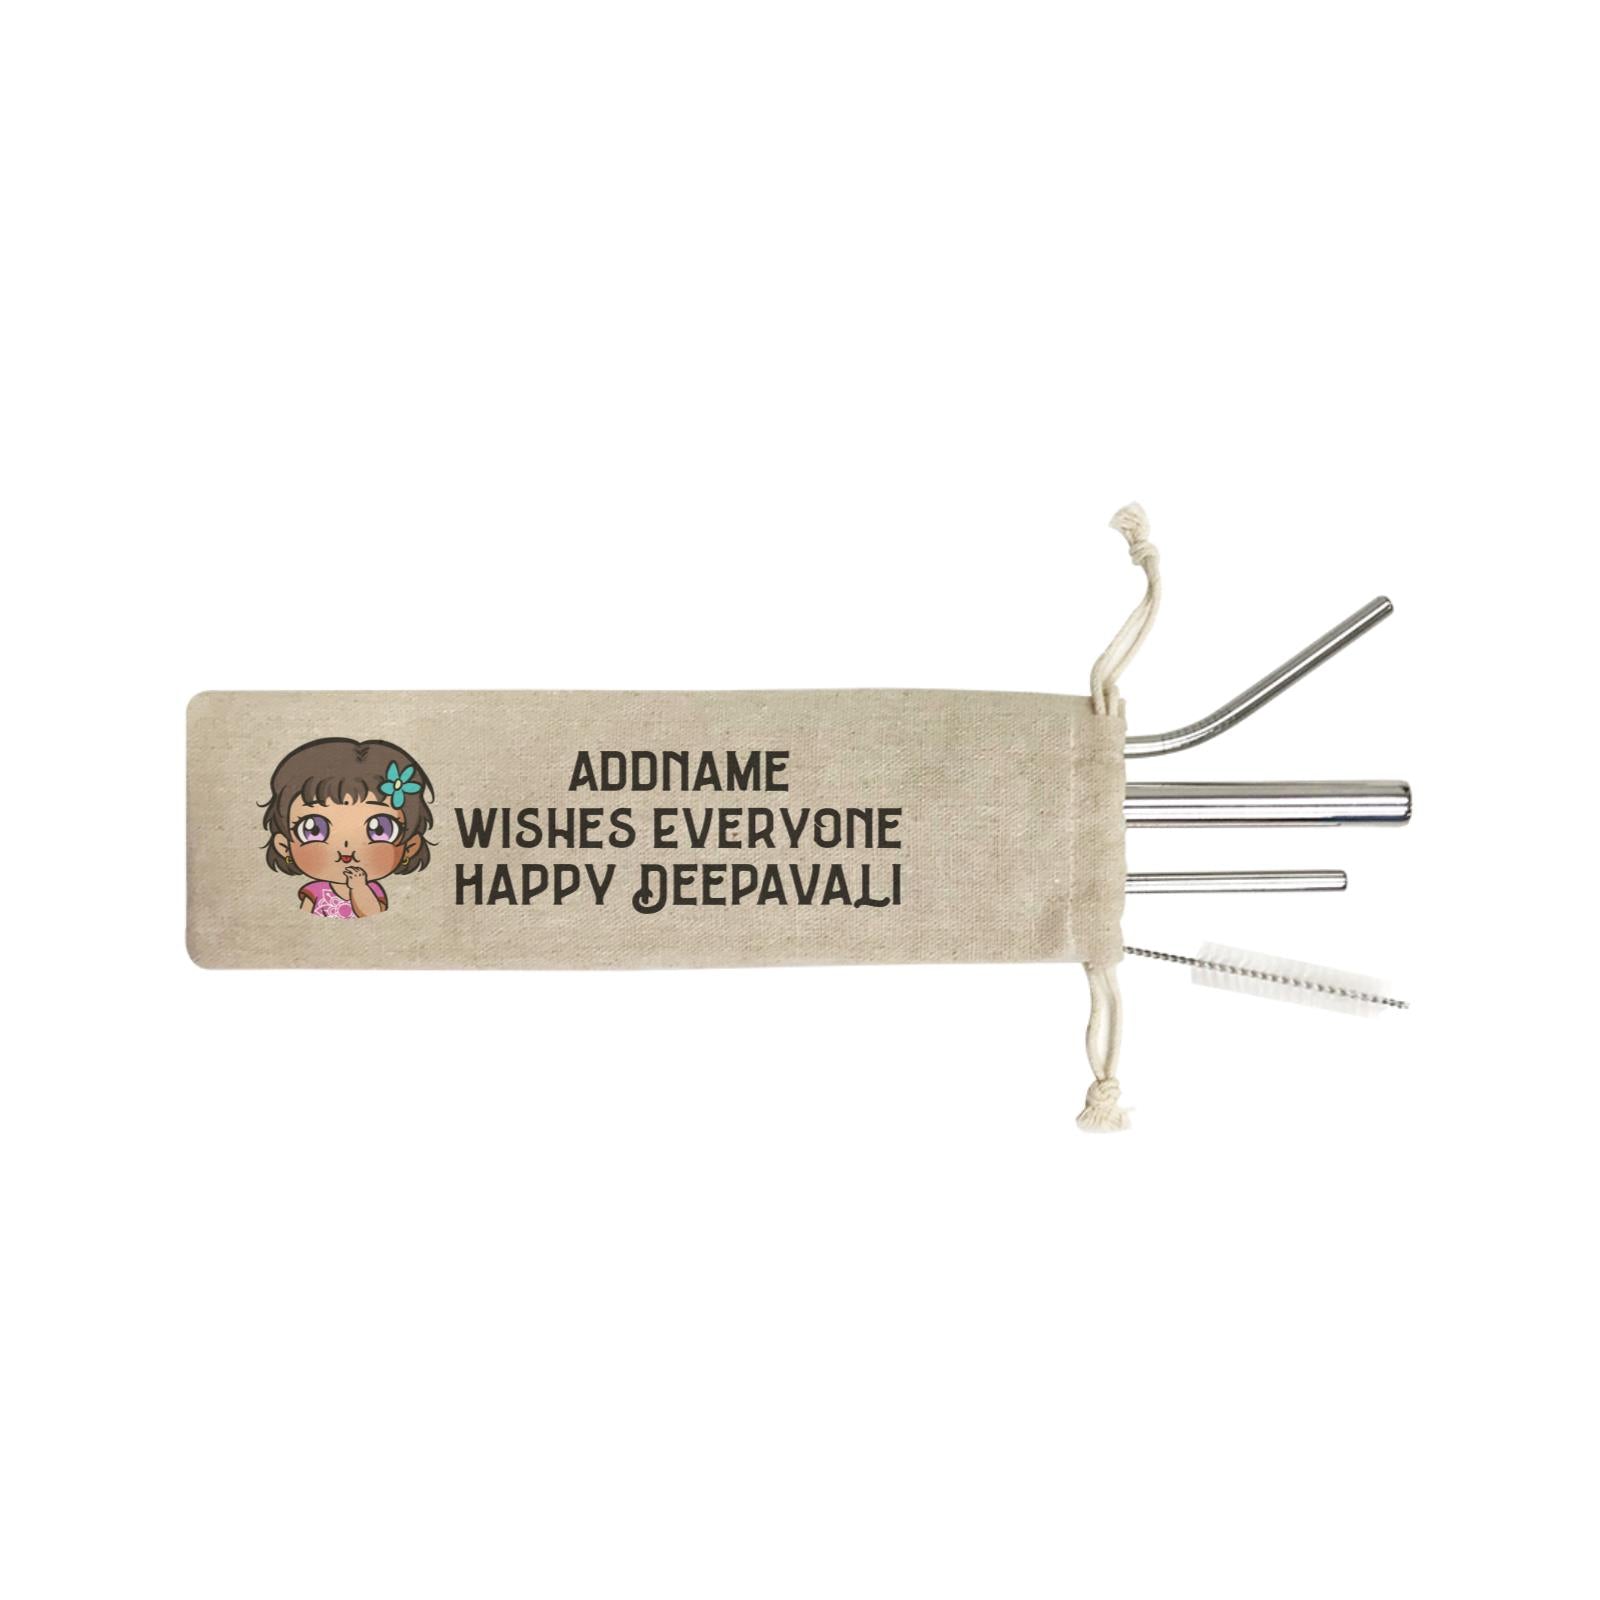 Deepavali Chibi Baby Girl Front Addname Wishes Everyone Deepavali SB 4-In-1 Stainless Steel Straw Set in Satchel